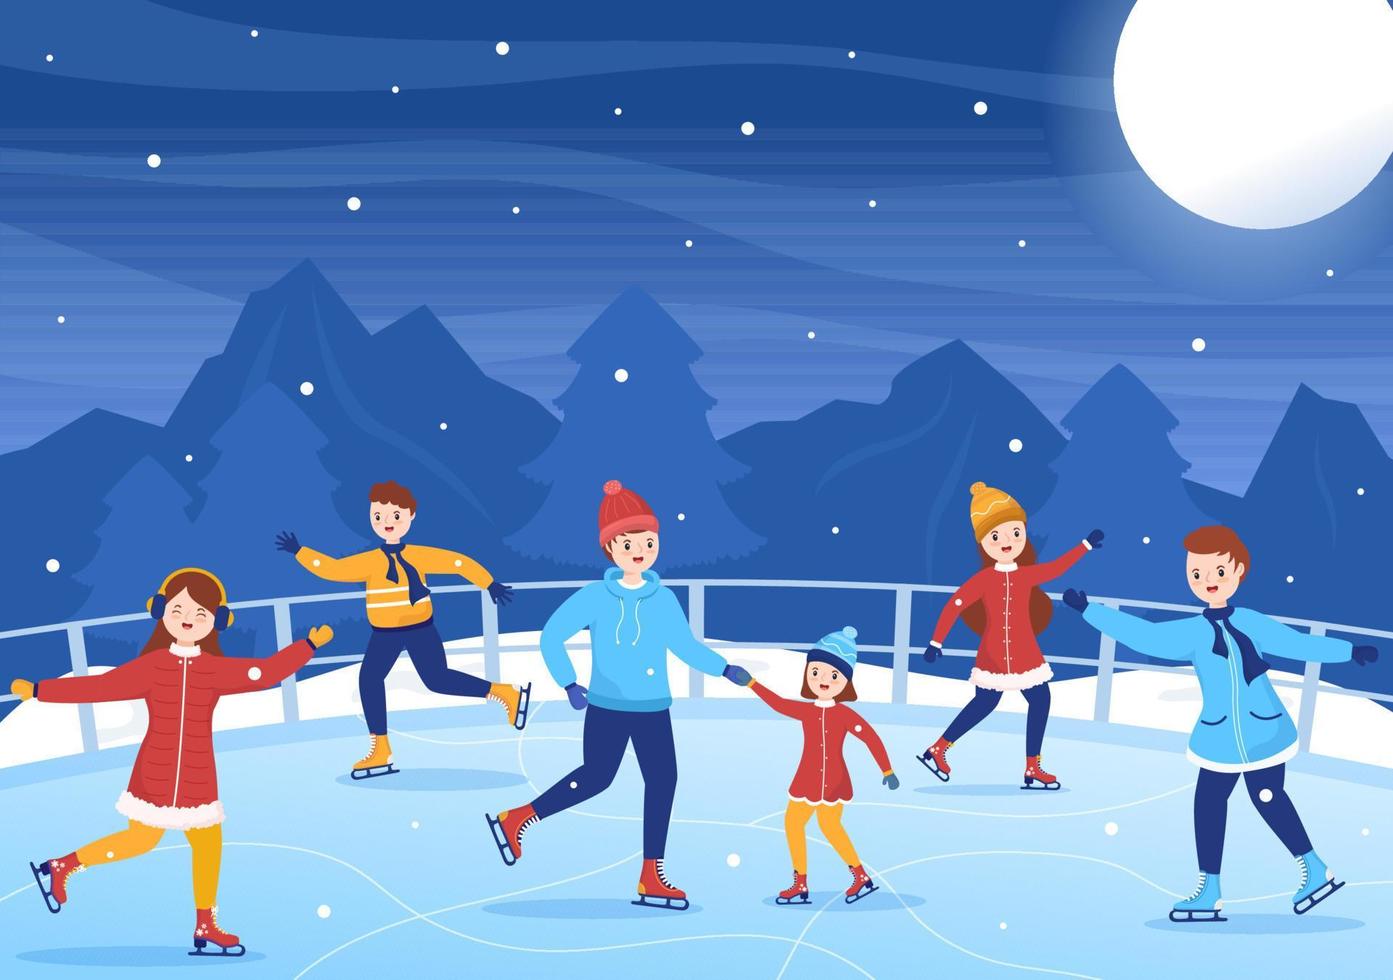 Ice Skating Hand Drawn Cartoon Flat Illustration of Winter Fun Outdoors Sport Activities on Ice Rink with Seasonal Outerwear vector